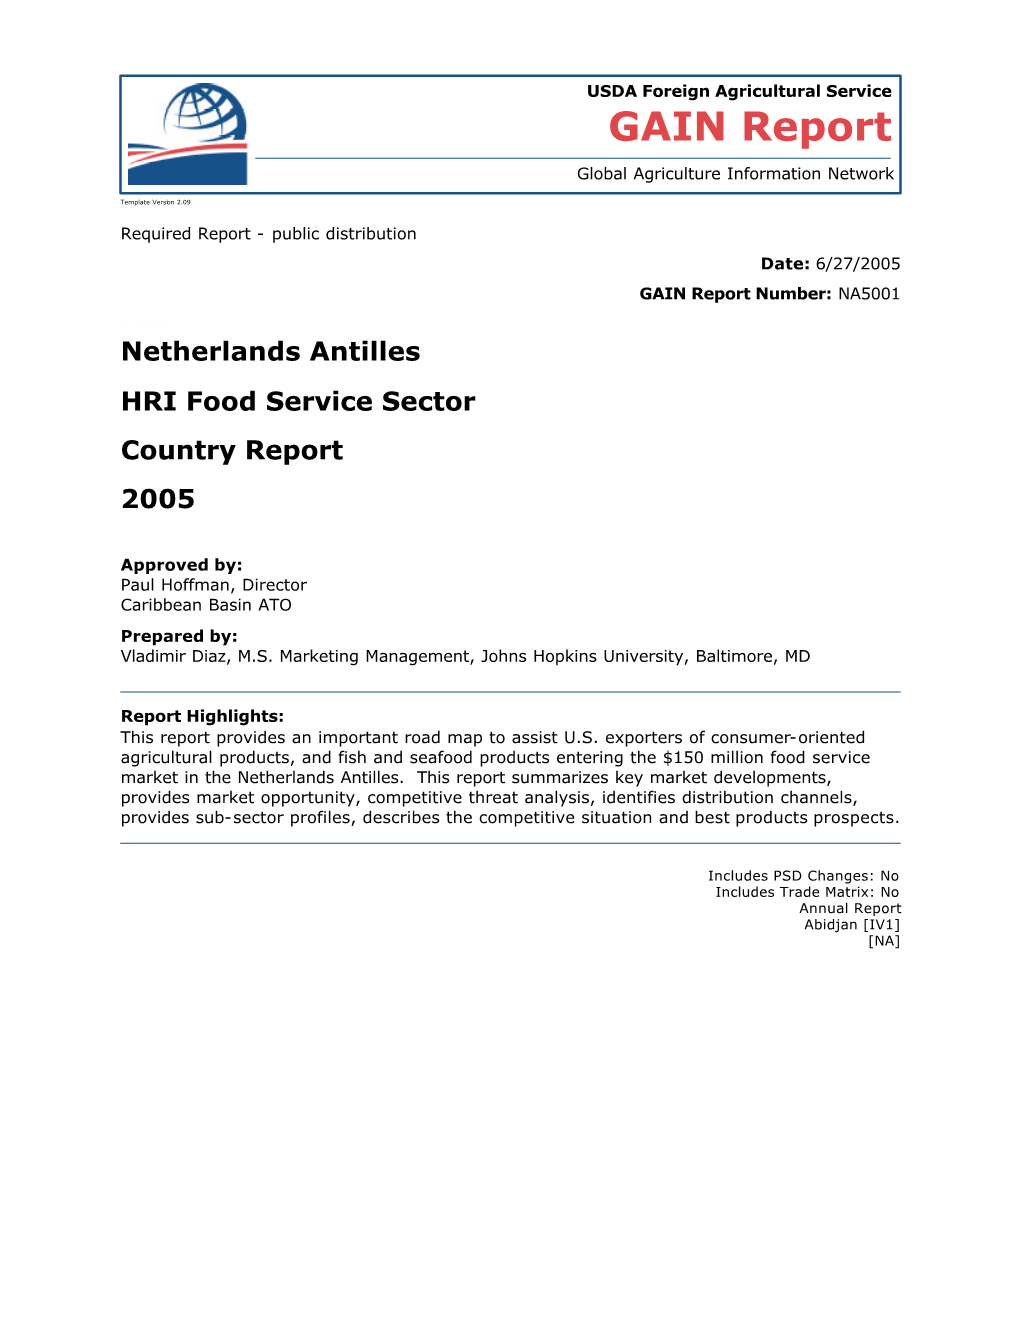 Netherlands Antilles HRI Food Service Sector Country Report 2005